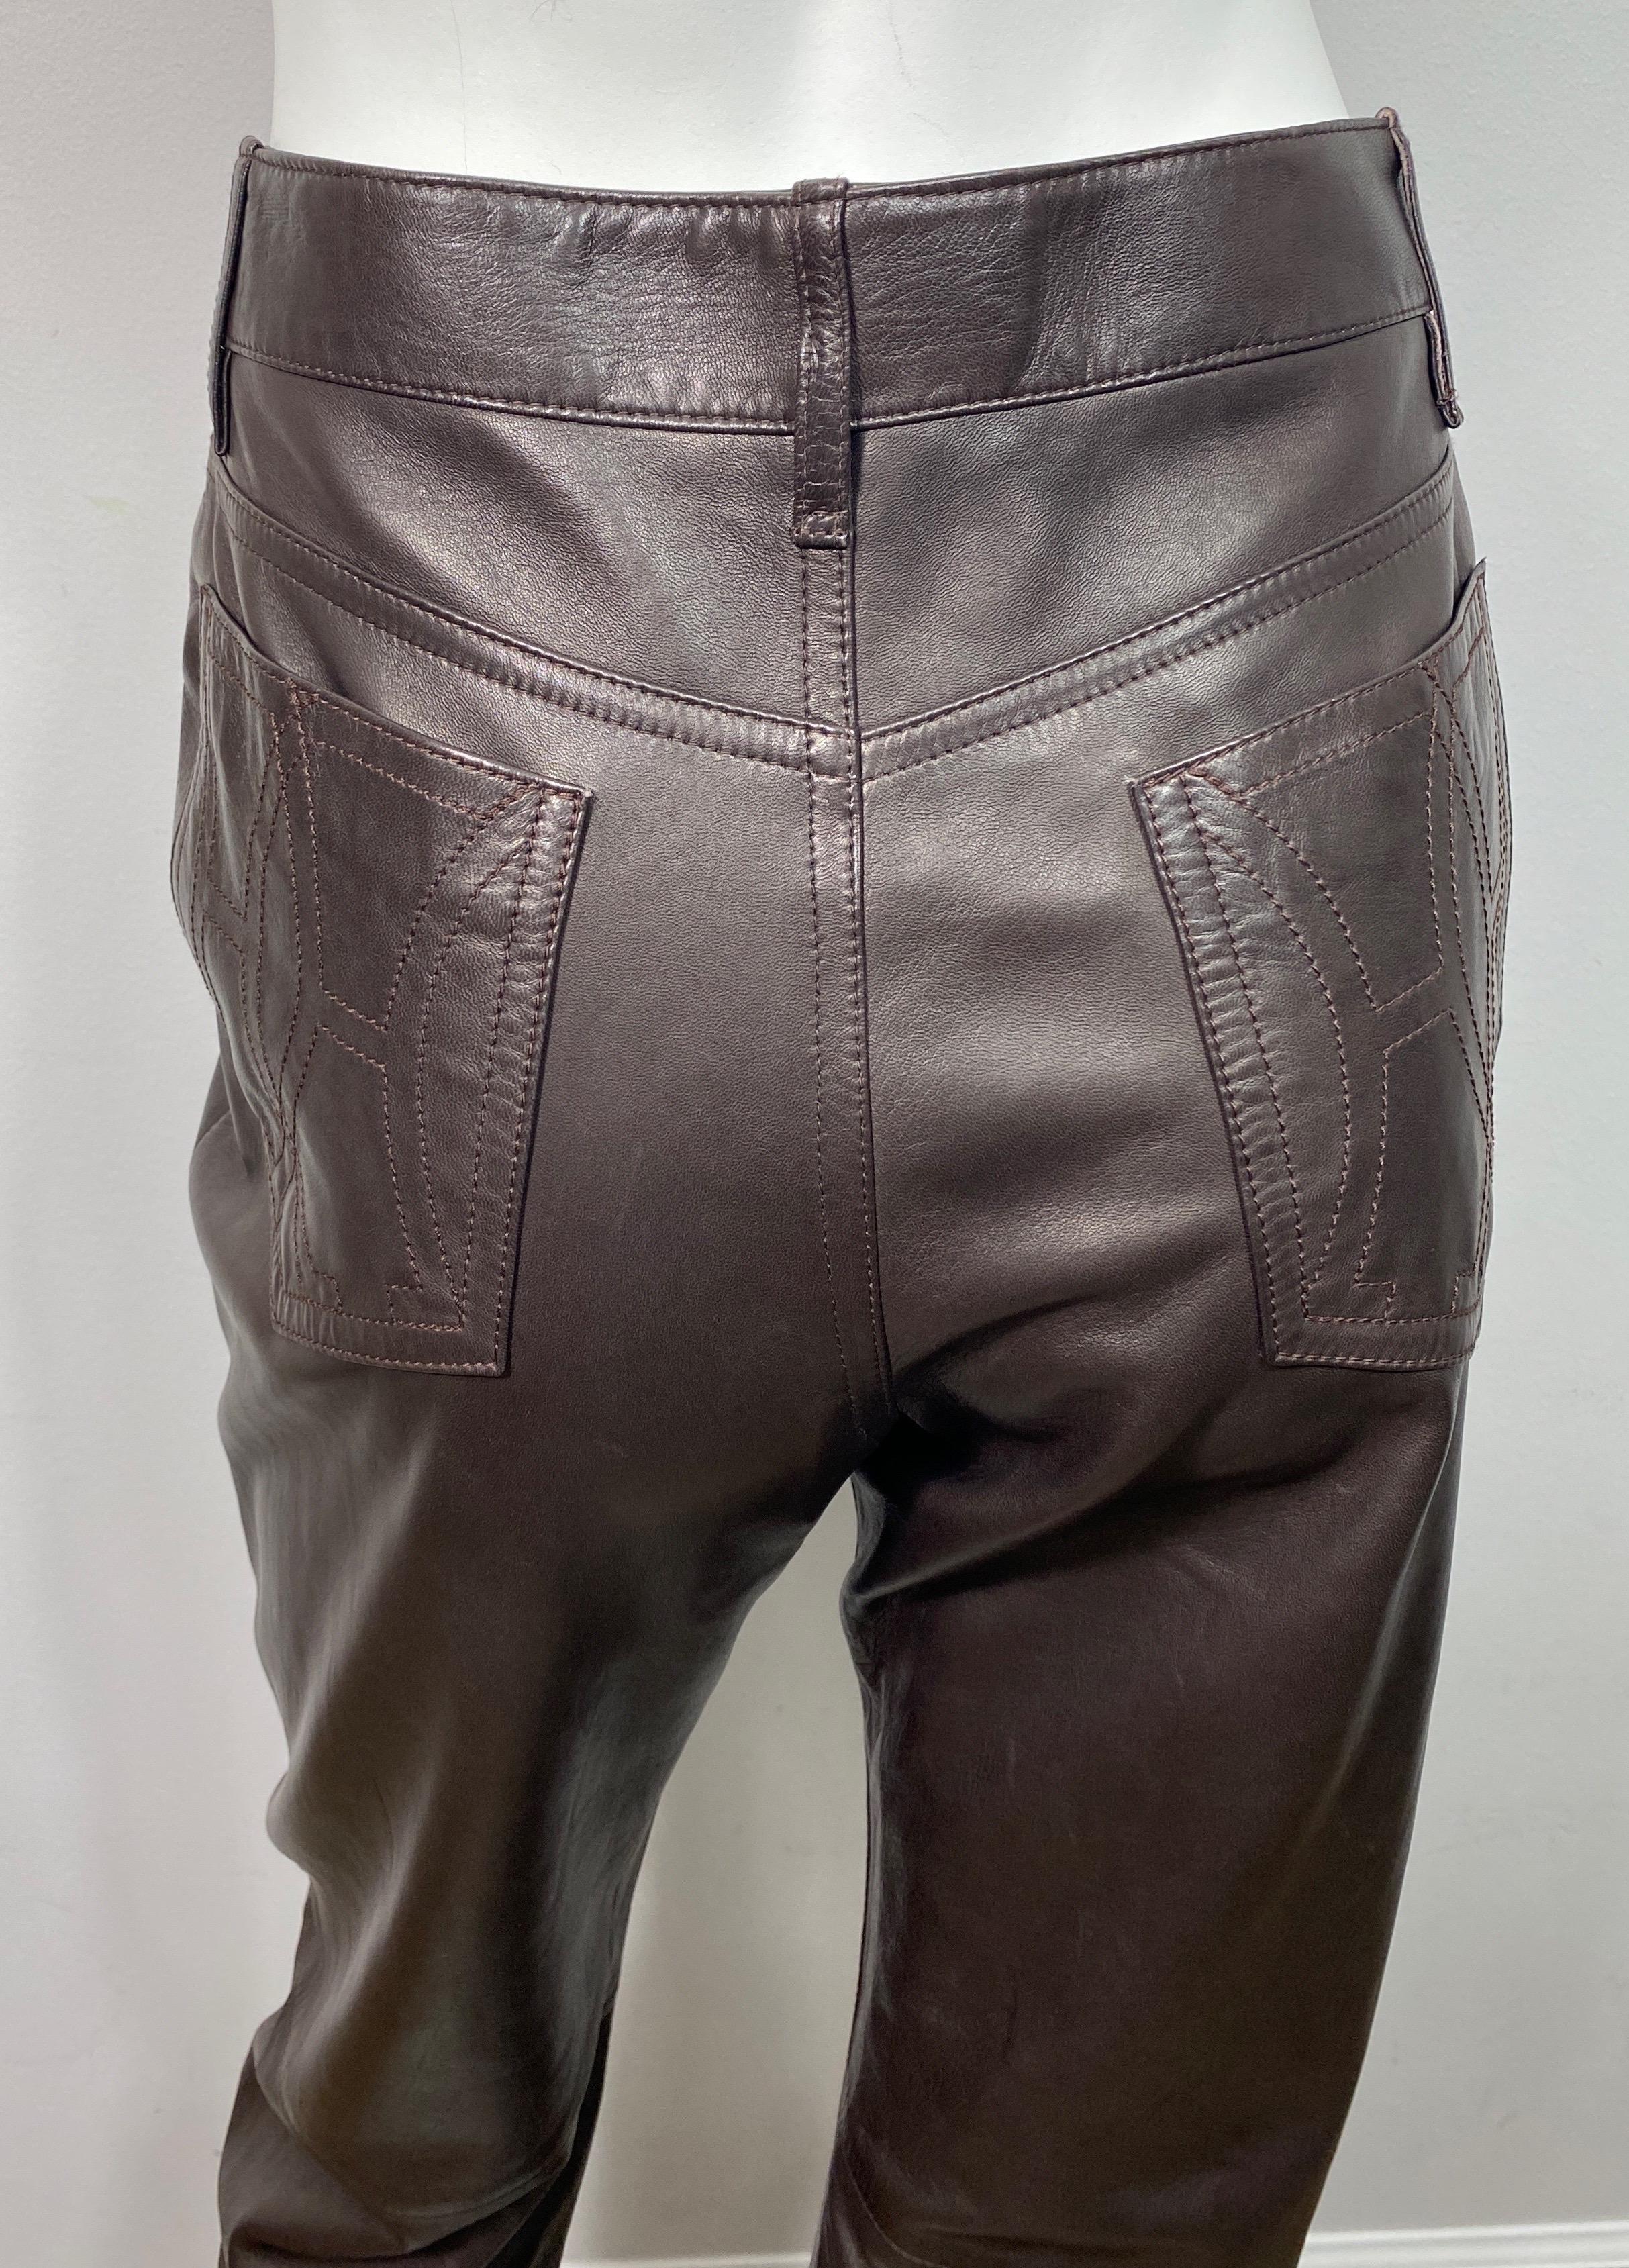 Hermes 1990’s Vintage Chocolate Brown Jean Style Leather Pants - Size 42 For Sale 8